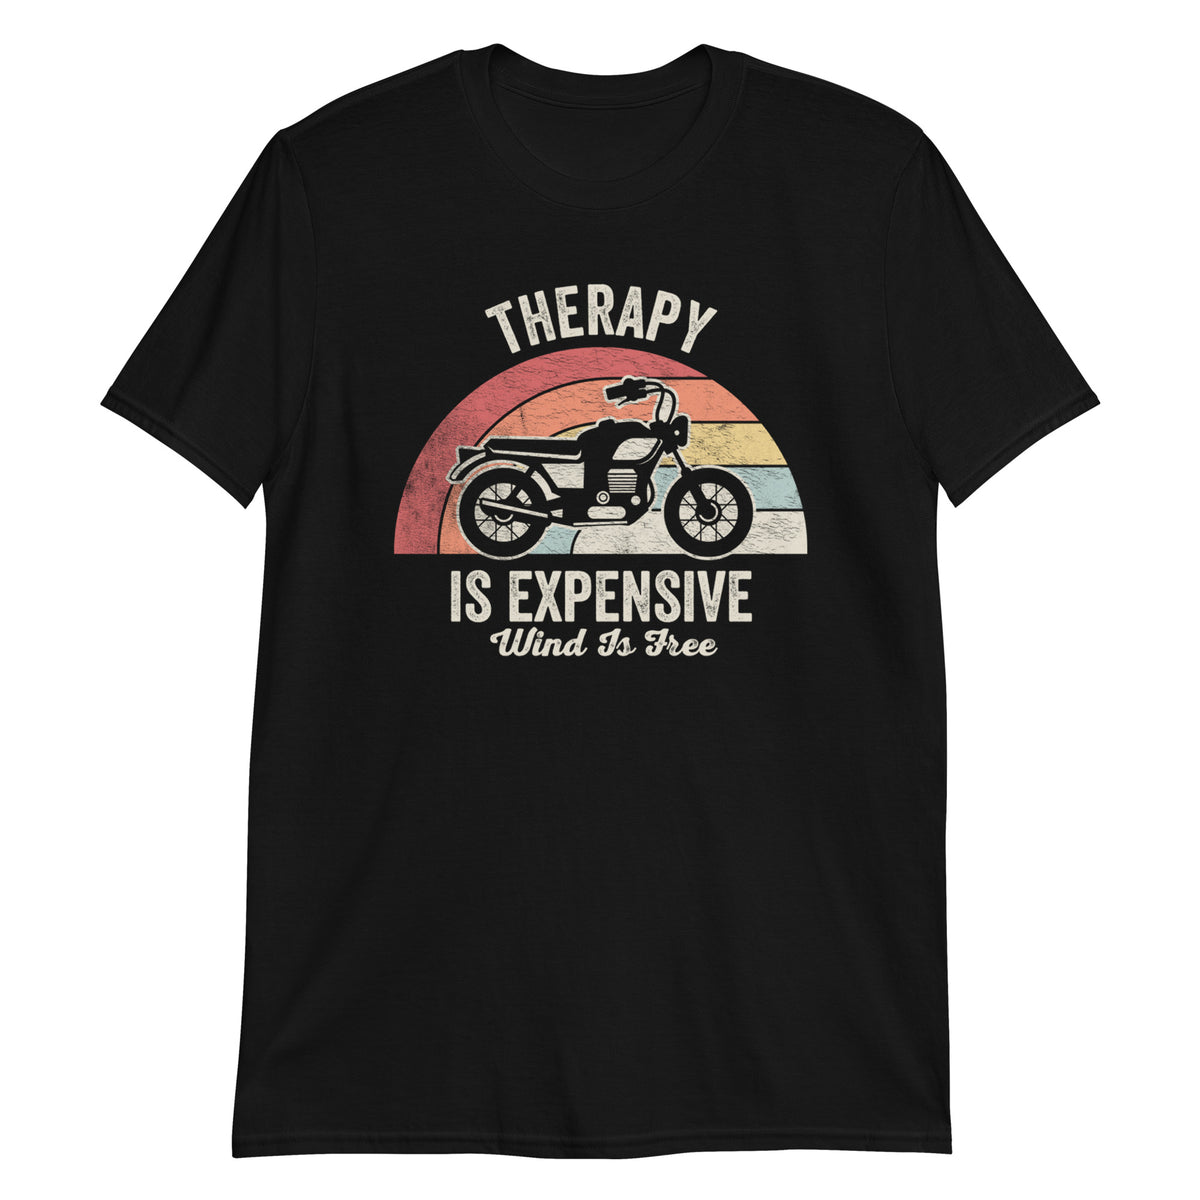 Therapy is Expensive Wind is Free T-Shirt